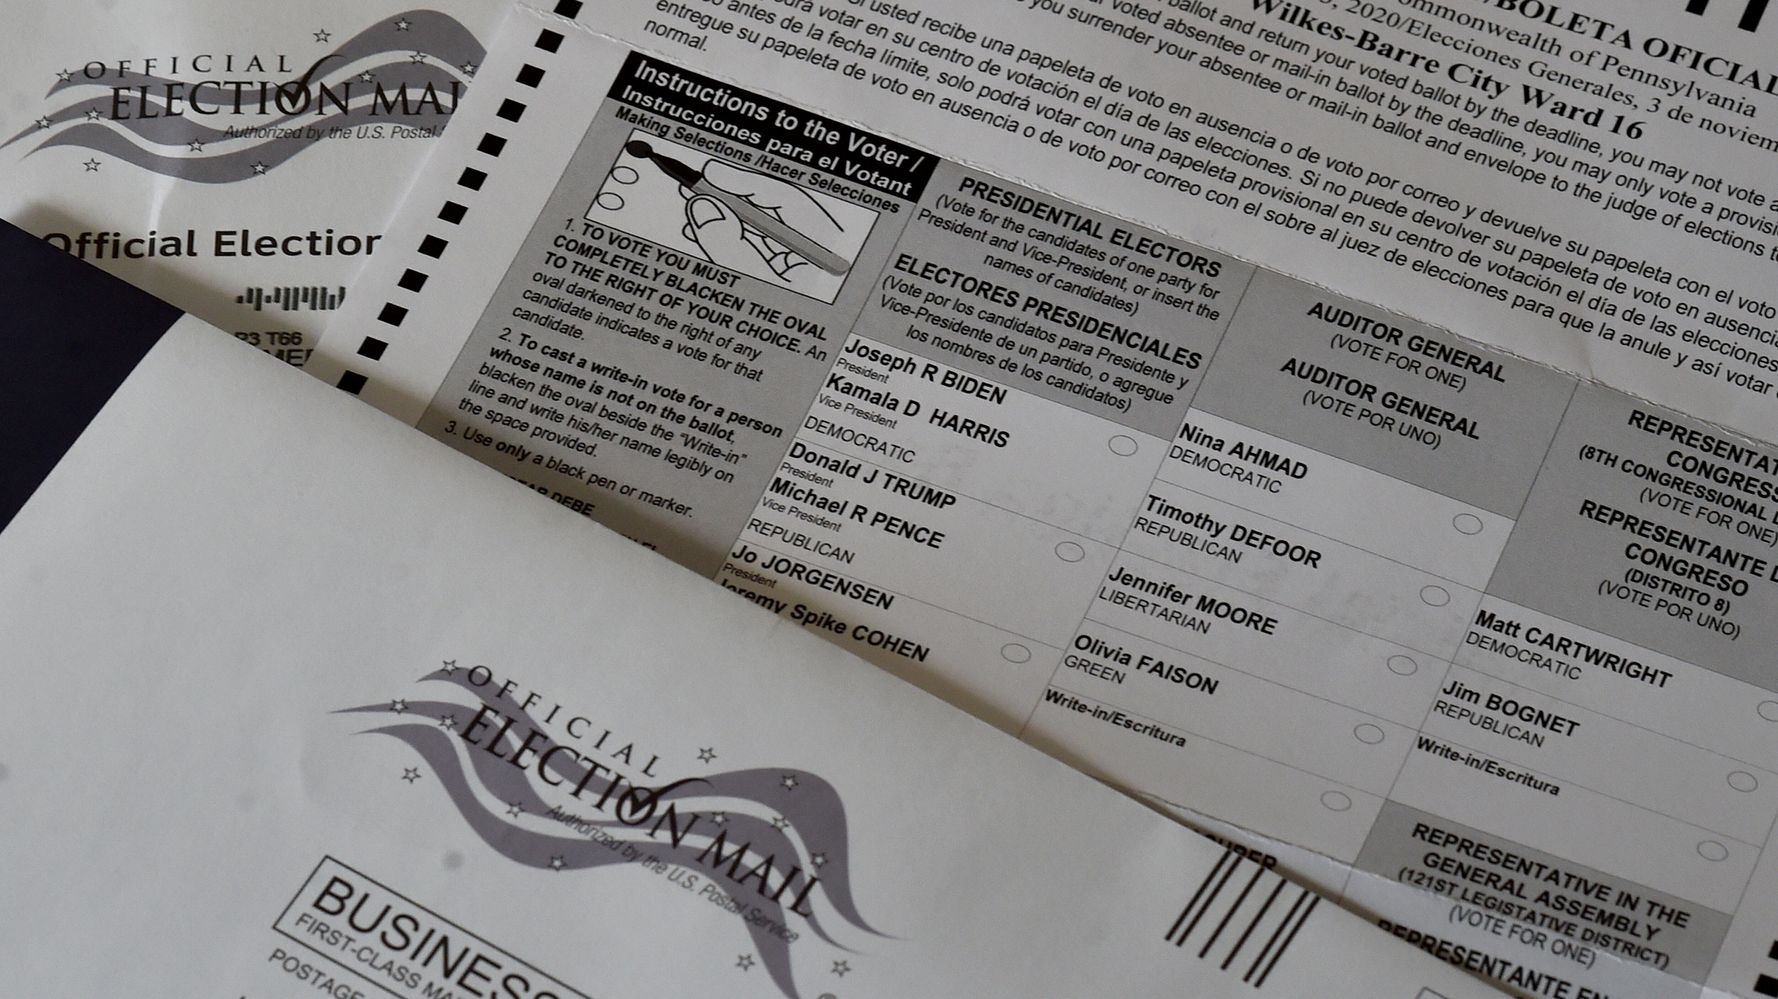 Pennsylvania Top Court Says Mail-In Ballots Can't Be Rejected Over Signature Mismatches